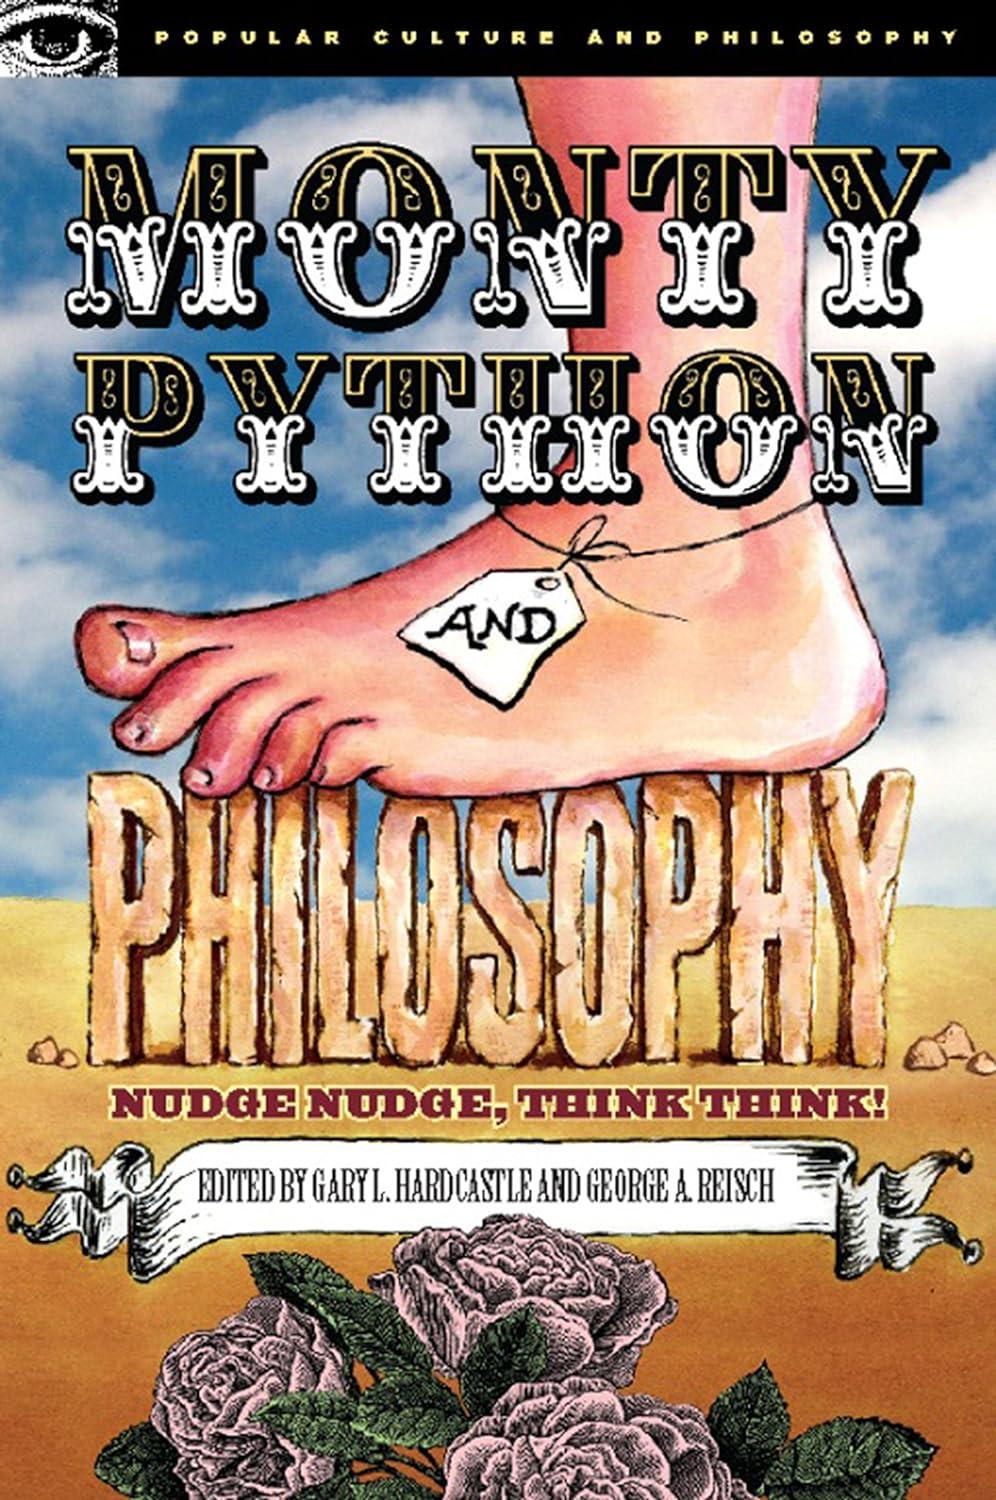 monty python and philosophy nudge nudge think think popular culture and philosophy 1st edition gary l.